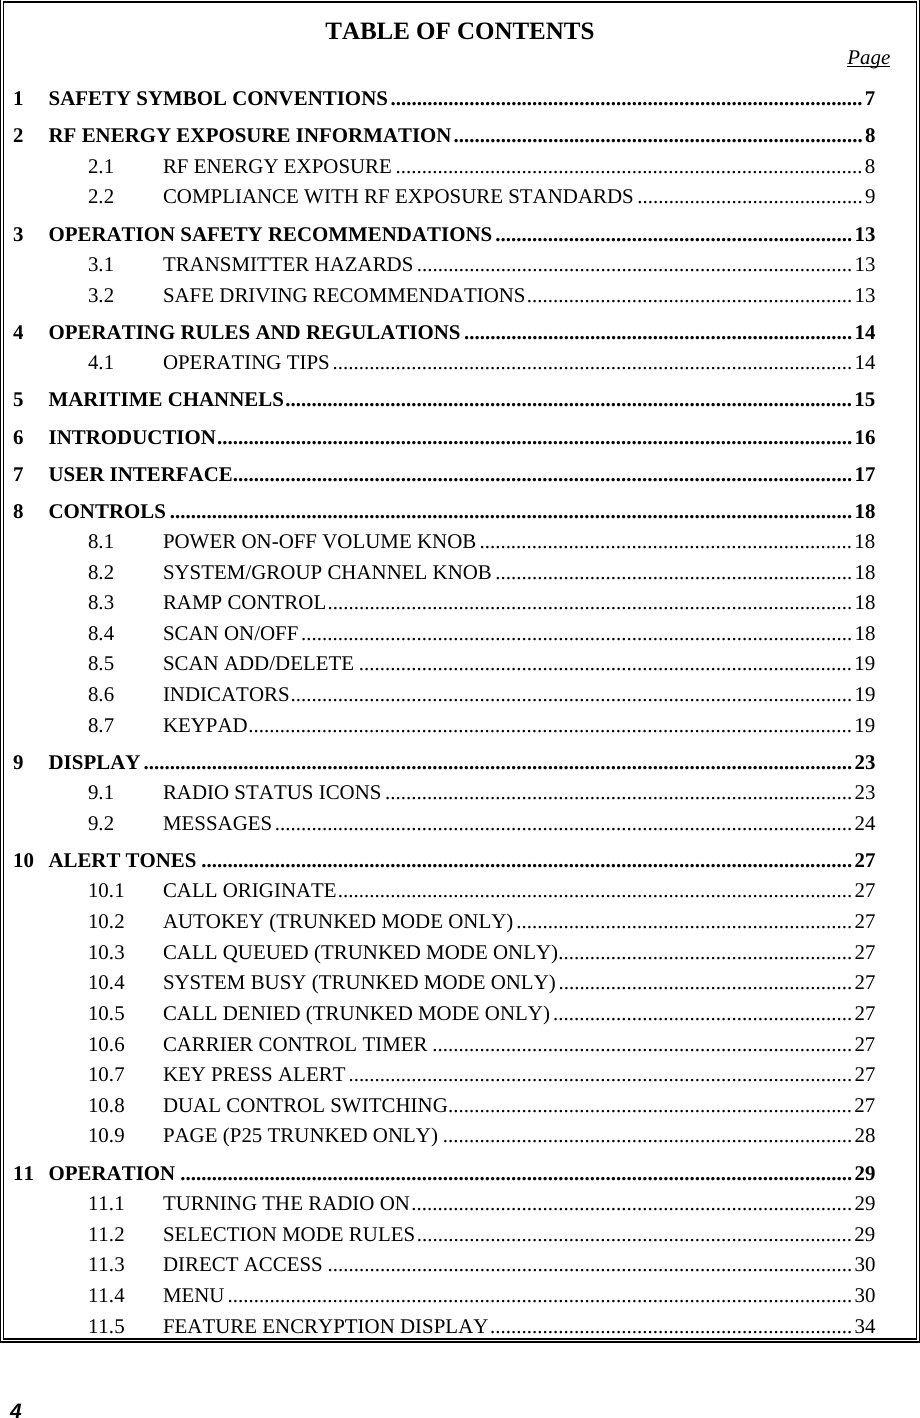  4 TABLE OF CONTENTS  Page 1 SAFETY SYMBOL CONVENTIONS..........................................................................................7 2 RF ENERGY EXPOSURE INFORMATION..............................................................................8 2.1 RF ENERGY EXPOSURE .........................................................................................8 2.2 COMPLIANCE WITH RF EXPOSURE STANDARDS ...........................................9 3 OPERATION SAFETY RECOMMENDATIONS....................................................................13 3.1 TRANSMITTER HAZARDS ...................................................................................13 3.2 SAFE DRIVING RECOMMENDATIONS..............................................................13 4 OPERATING RULES AND REGULATIONS ..........................................................................14 4.1 OPERATING TIPS...................................................................................................14 5 MARITIME CHANNELS............................................................................................................15 6 INTRODUCTION.........................................................................................................................16 7 USER INTERFACE......................................................................................................................17 8 CONTROLS ..................................................................................................................................18 8.1 POWER ON-OFF VOLUME KNOB.......................................................................18 8.2 SYSTEM/GROUP CHANNEL KNOB ....................................................................18 8.3 RAMP CONTROL....................................................................................................18 8.4 SCAN ON/OFF.........................................................................................................18 8.5 SCAN ADD/DELETE ..............................................................................................19 8.6 INDICATORS...........................................................................................................19 8.7 KEYPAD...................................................................................................................19 9 DISPLAY.......................................................................................................................................23 9.1 RADIO STATUS ICONS .........................................................................................23 9.2 MESSAGES..............................................................................................................24 10 ALERT TONES ............................................................................................................................27 10.1 CALL ORIGINATE..................................................................................................27 10.2 AUTOKEY (TRUNKED MODE ONLY)................................................................27 10.3 CALL QUEUED (TRUNKED MODE ONLY)........................................................27 10.4 SYSTEM BUSY (TRUNKED MODE ONLY)........................................................27 10.5 CALL DENIED (TRUNKED MODE ONLY).........................................................27 10.6 CARRIER CONTROL TIMER ................................................................................27 10.7 KEY PRESS ALERT................................................................................................27 10.8 DUAL CONTROL SWITCHING.............................................................................27 10.9 PAGE (P25 TRUNKED ONLY) ..............................................................................28 11 OPERATION ................................................................................................................................29 11.1 TURNING THE RADIO ON....................................................................................29 11.2 SELECTION MODE RULES...................................................................................29 11.3 DIRECT ACCESS ....................................................................................................30 11.4 MENU.......................................................................................................................30 11.5 FEATURE ENCRYPTION DISPLAY.....................................................................34 